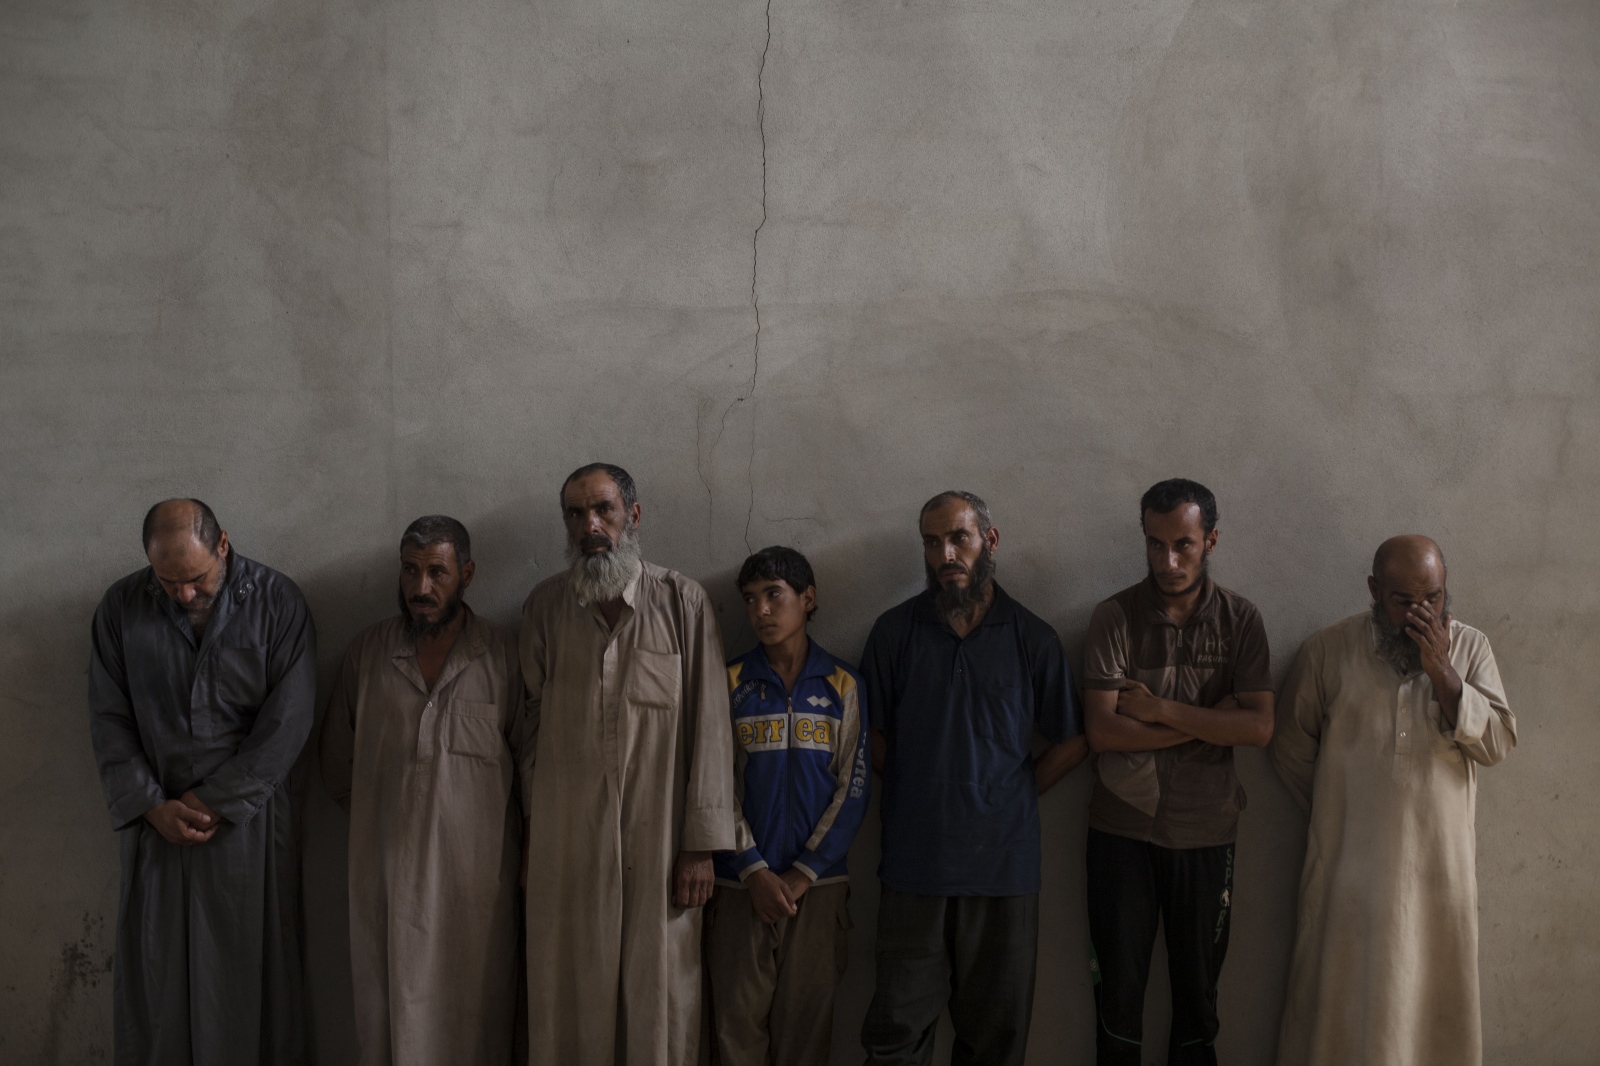 Displaced men from Hawija are lined up against a wall at a Kurdish screening center in Dibis. They are brought to the center for a screening process before being moved to camps for displaced people in the Kurdish region of Iraq.